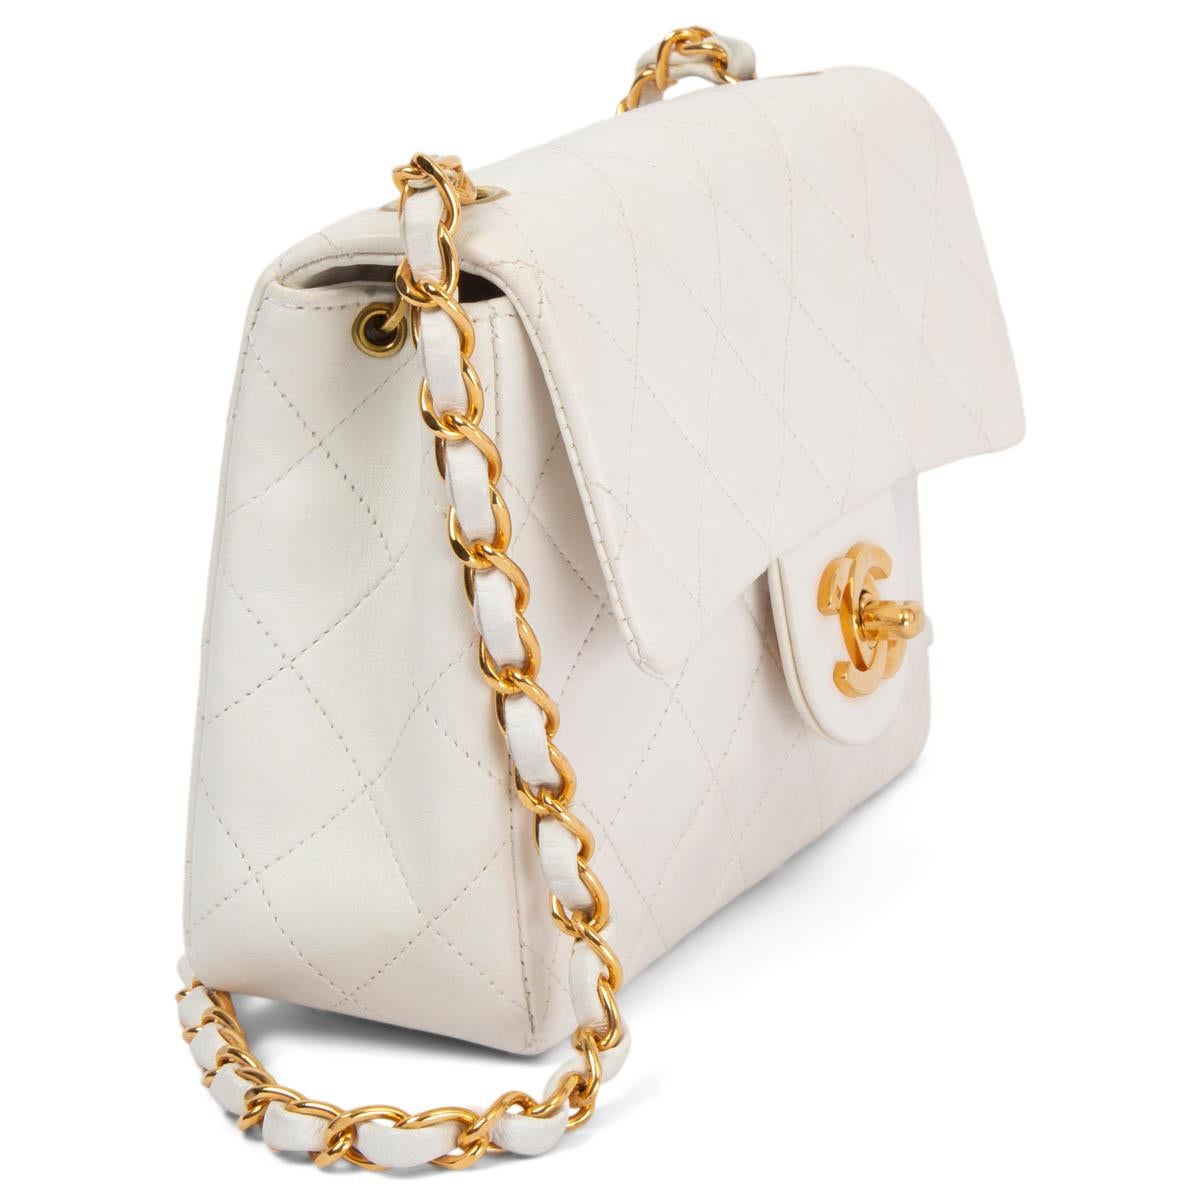 100% authentic Chanel 1997-1999 Mini Square Flap Shoulder Bag in white quilted lambskin featuring gold-tone hardware. Opens with the classic CC turn-lock to a white leather lined interior with one zipper pocket and one open pocket against the back.